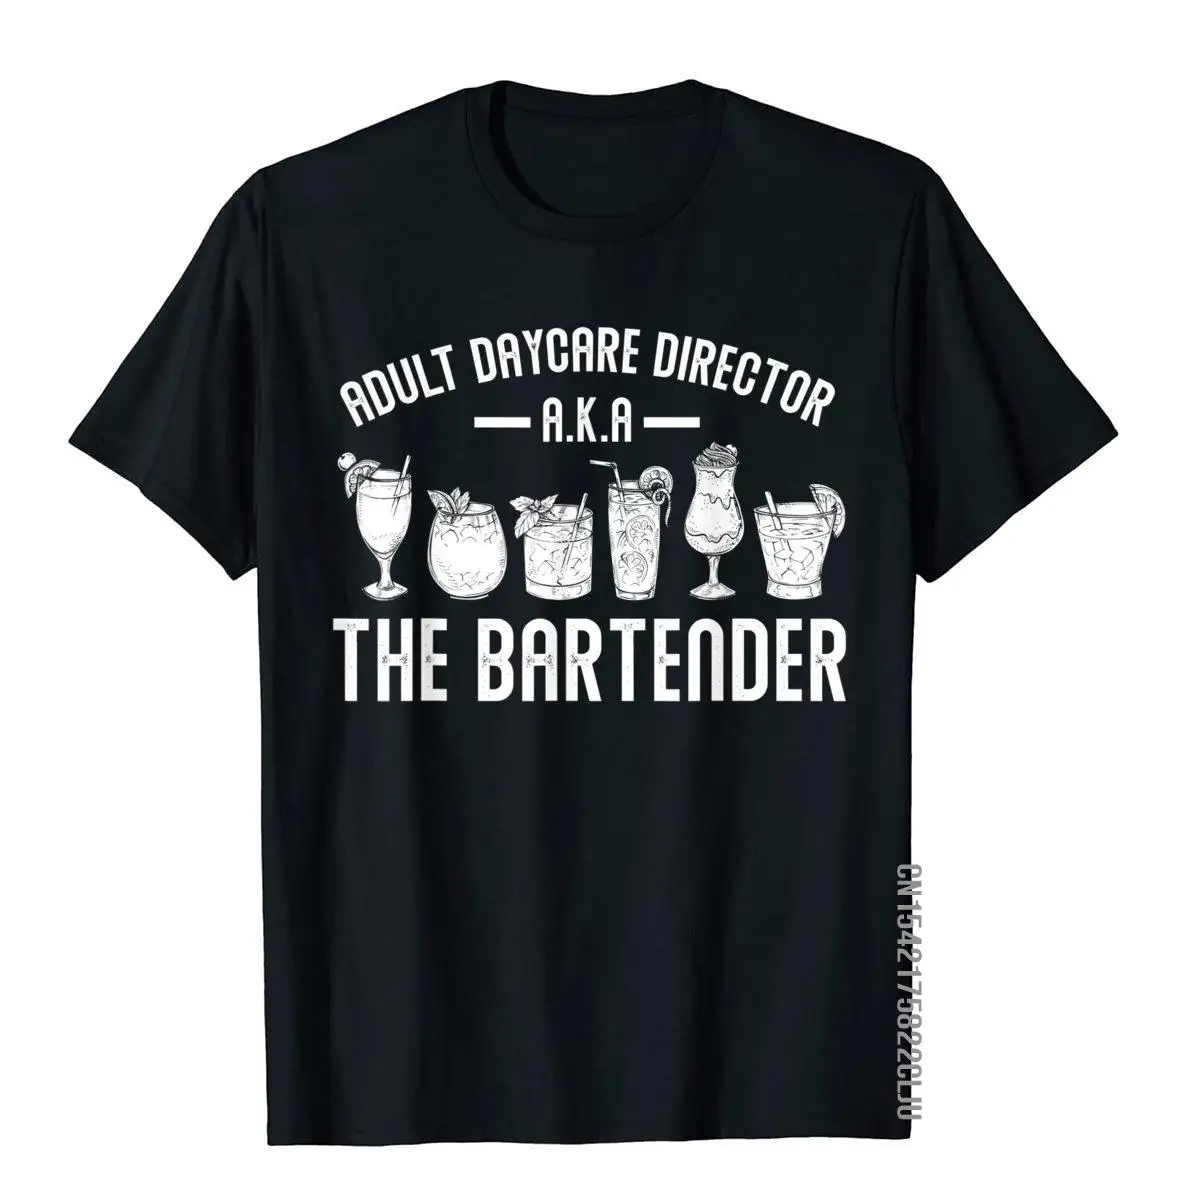 

Adult Daycare Director A.K.A. The Bartender Funny Bartender T-Shirt Casual Tops Shirts Cotton Men T Shirts Funny Graphic